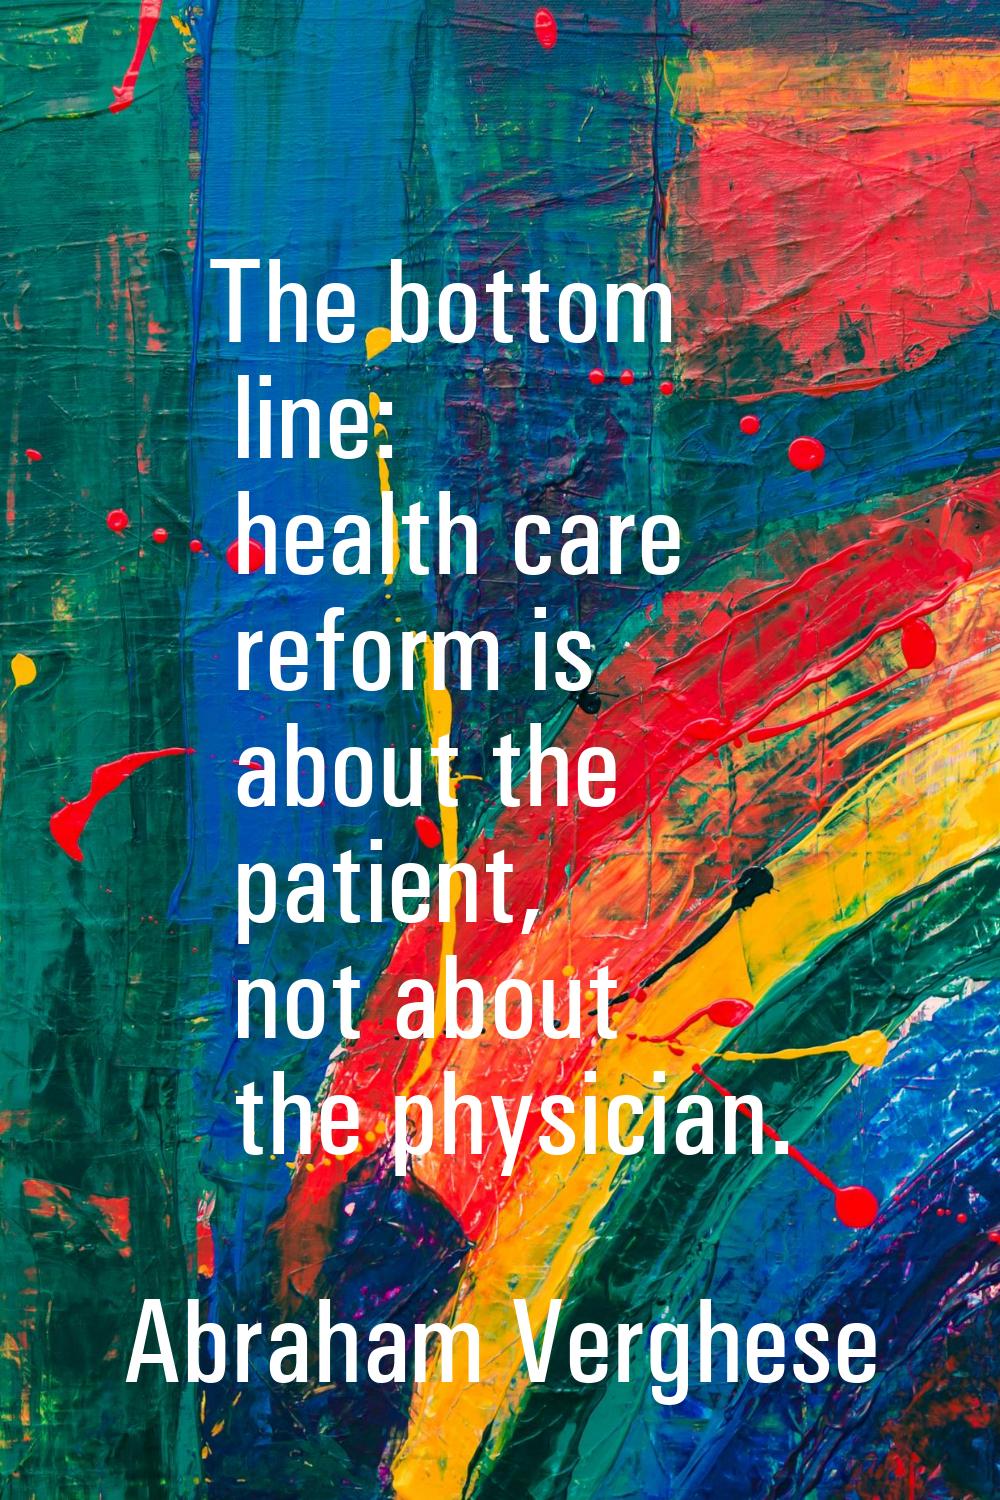 The bottom line: health care reform is about the patient, not about the physician.